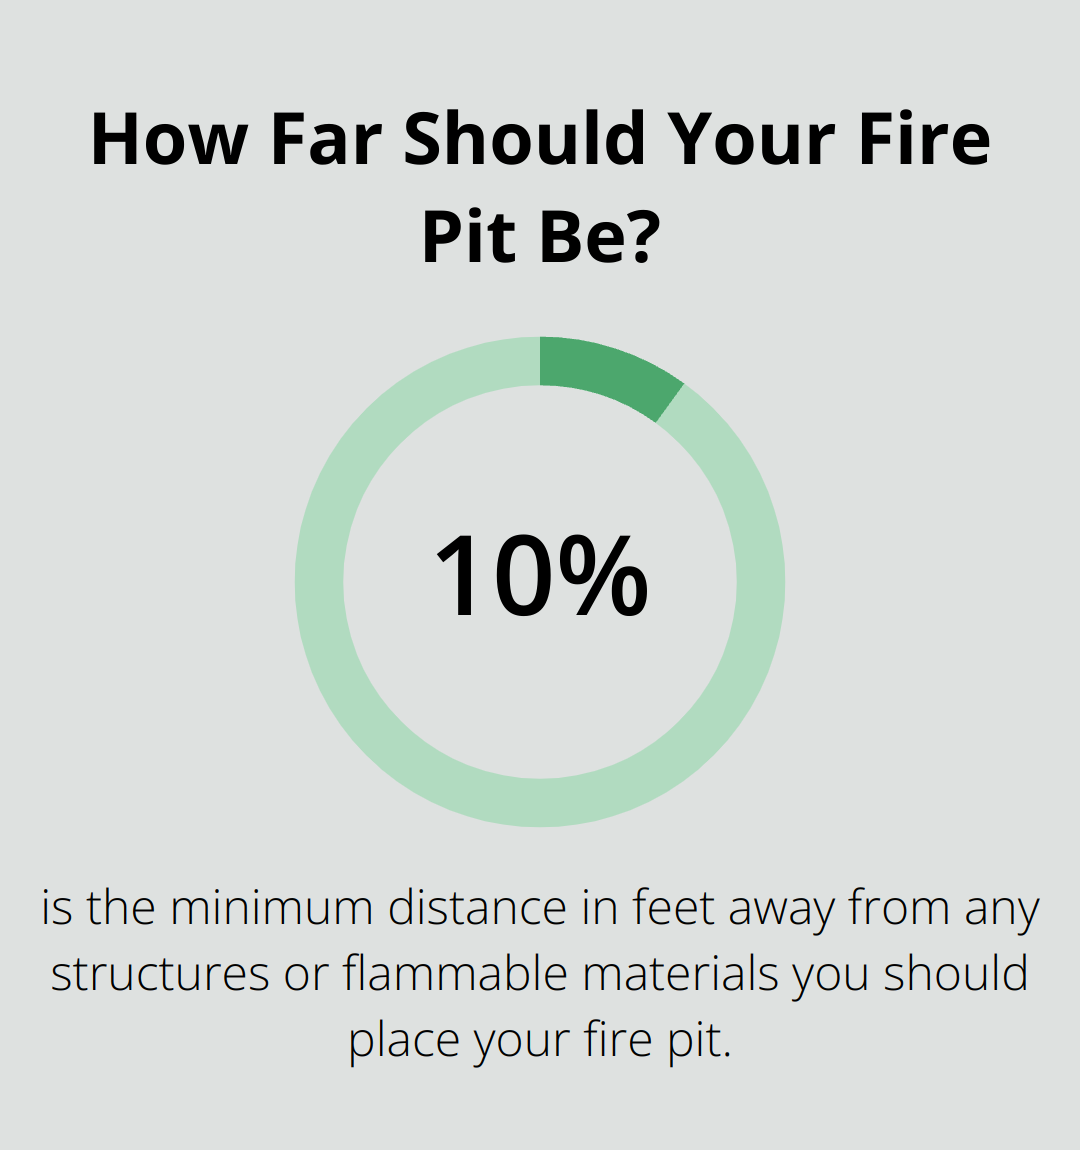 How Far Should Your Fire Pit Be?